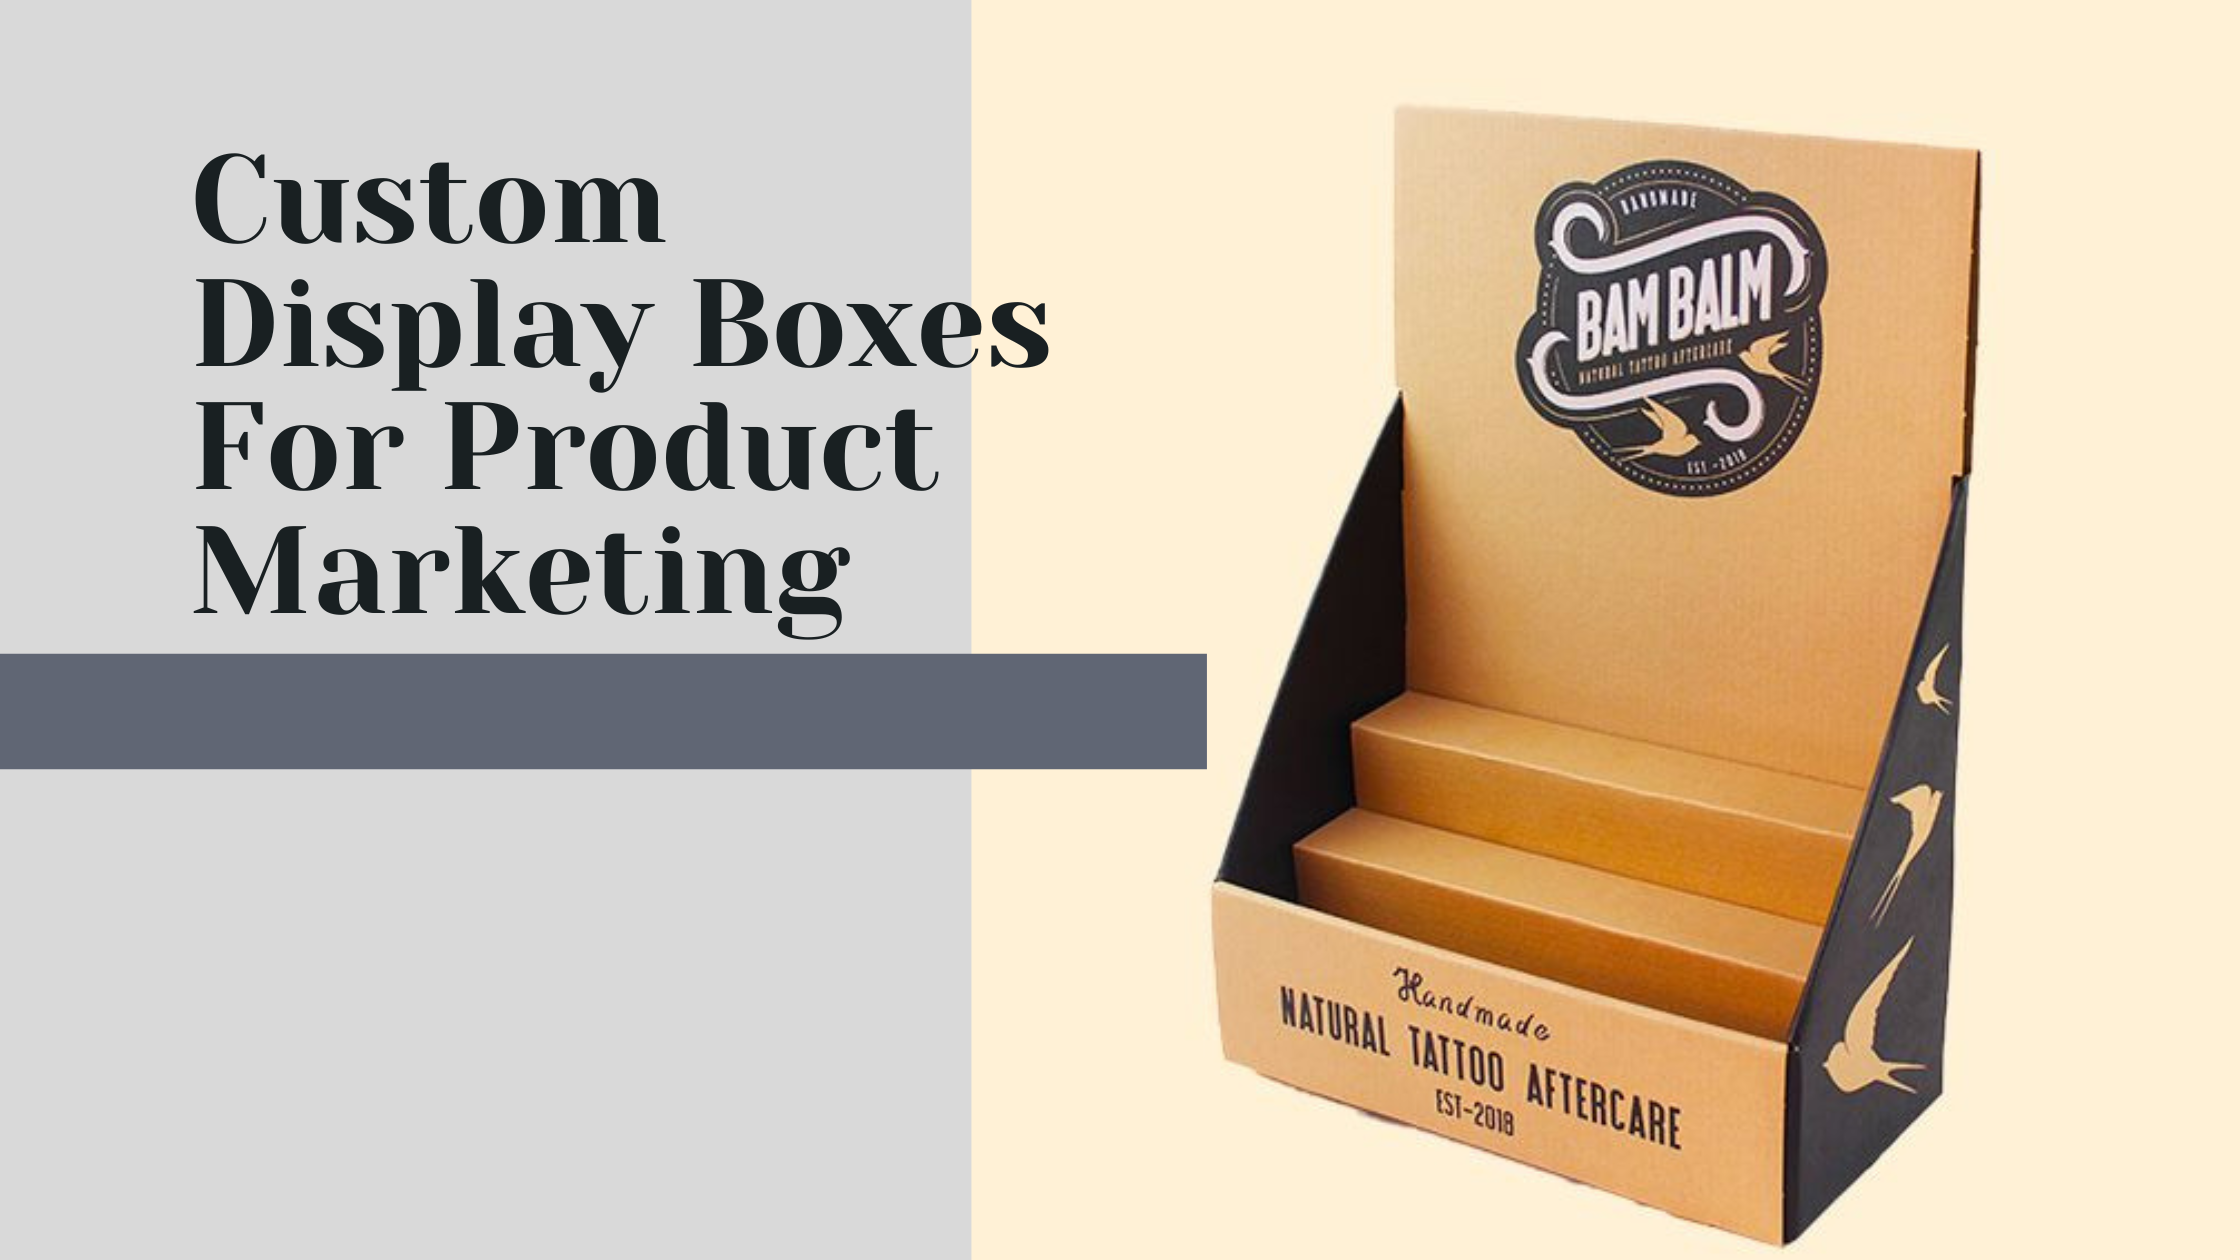 6 Reasons To Use Custom Display Boxes For Product Marketing